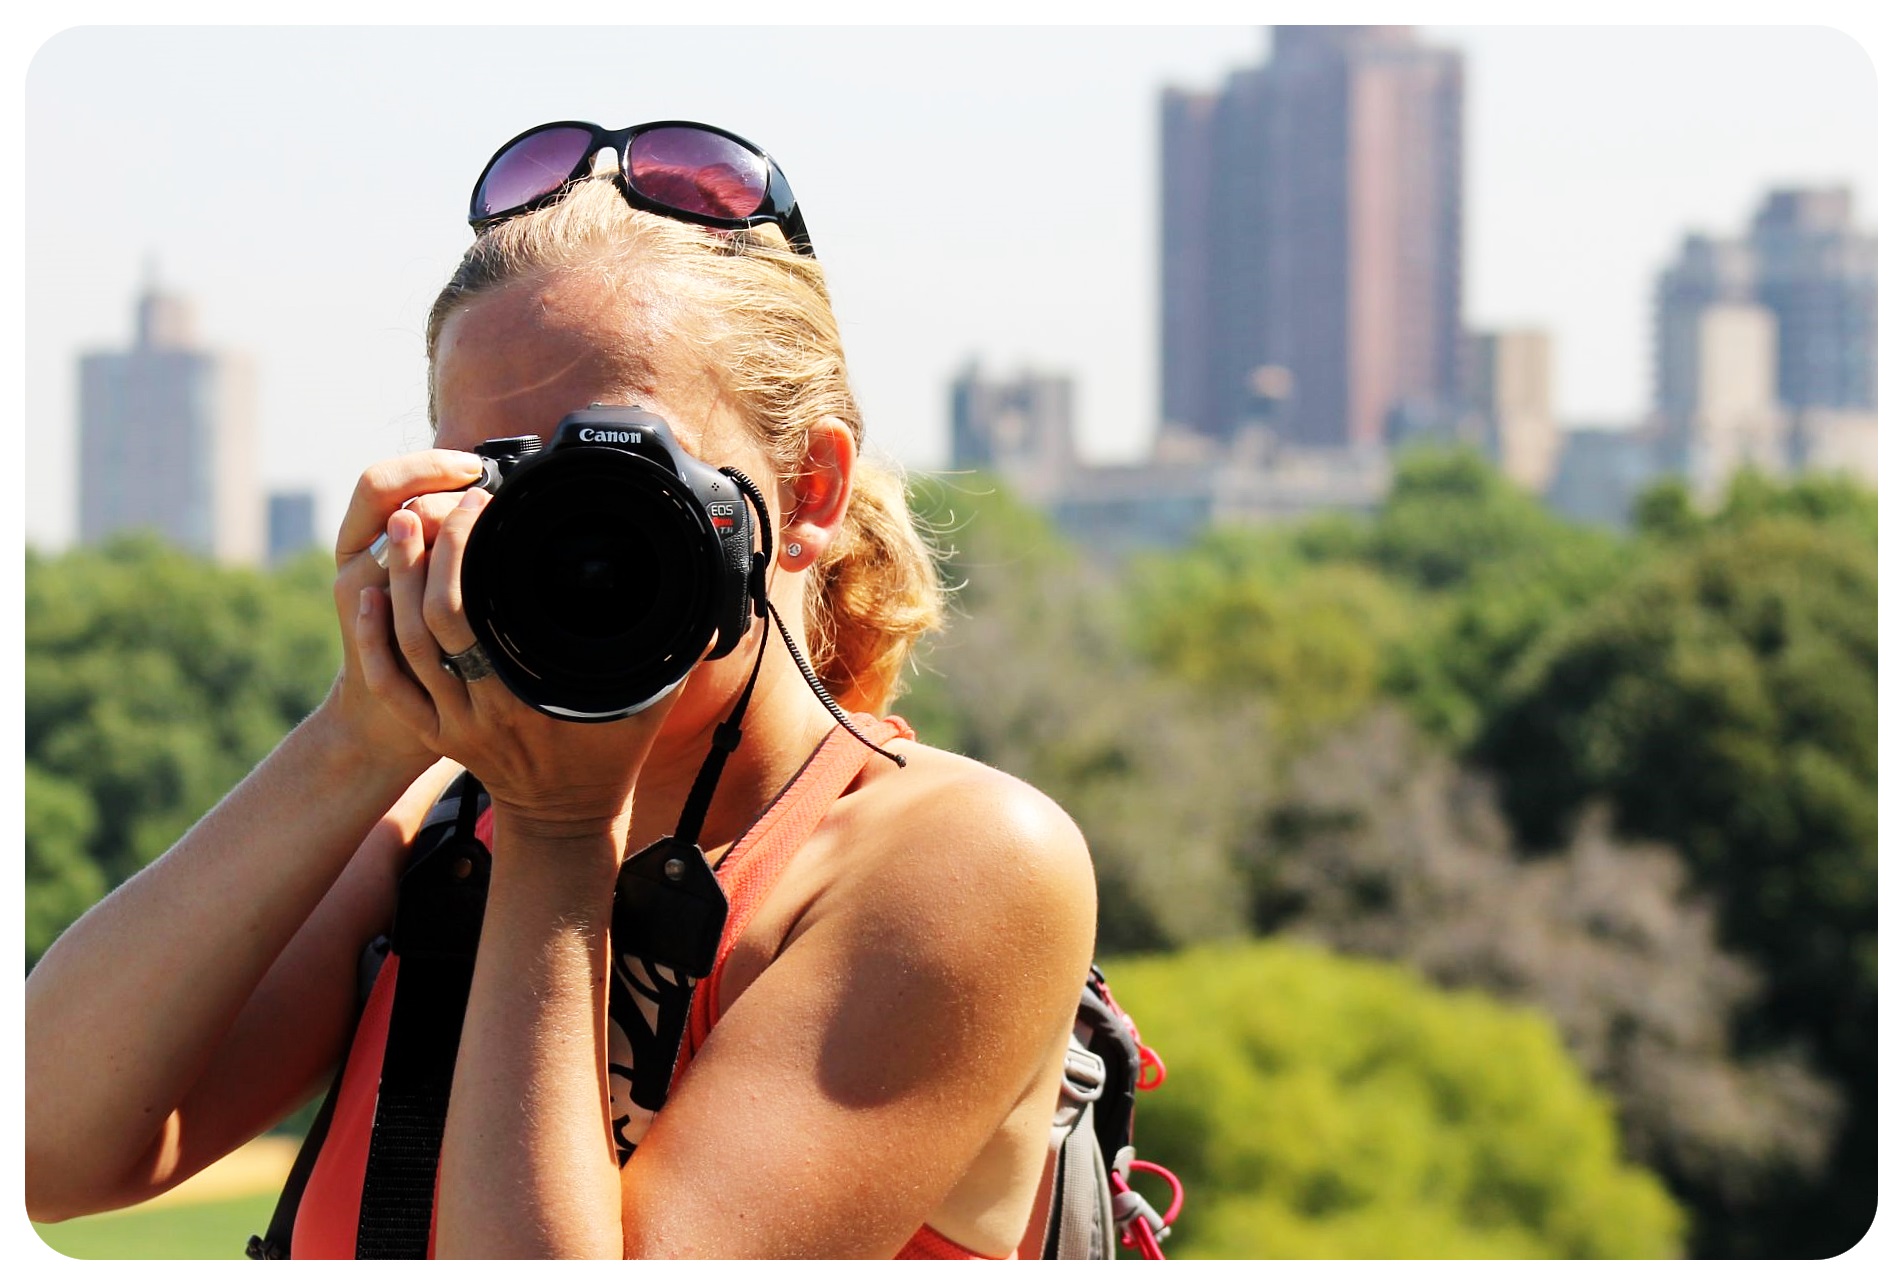 How To Make Money On Photography While Travelling: Top 5 Ways